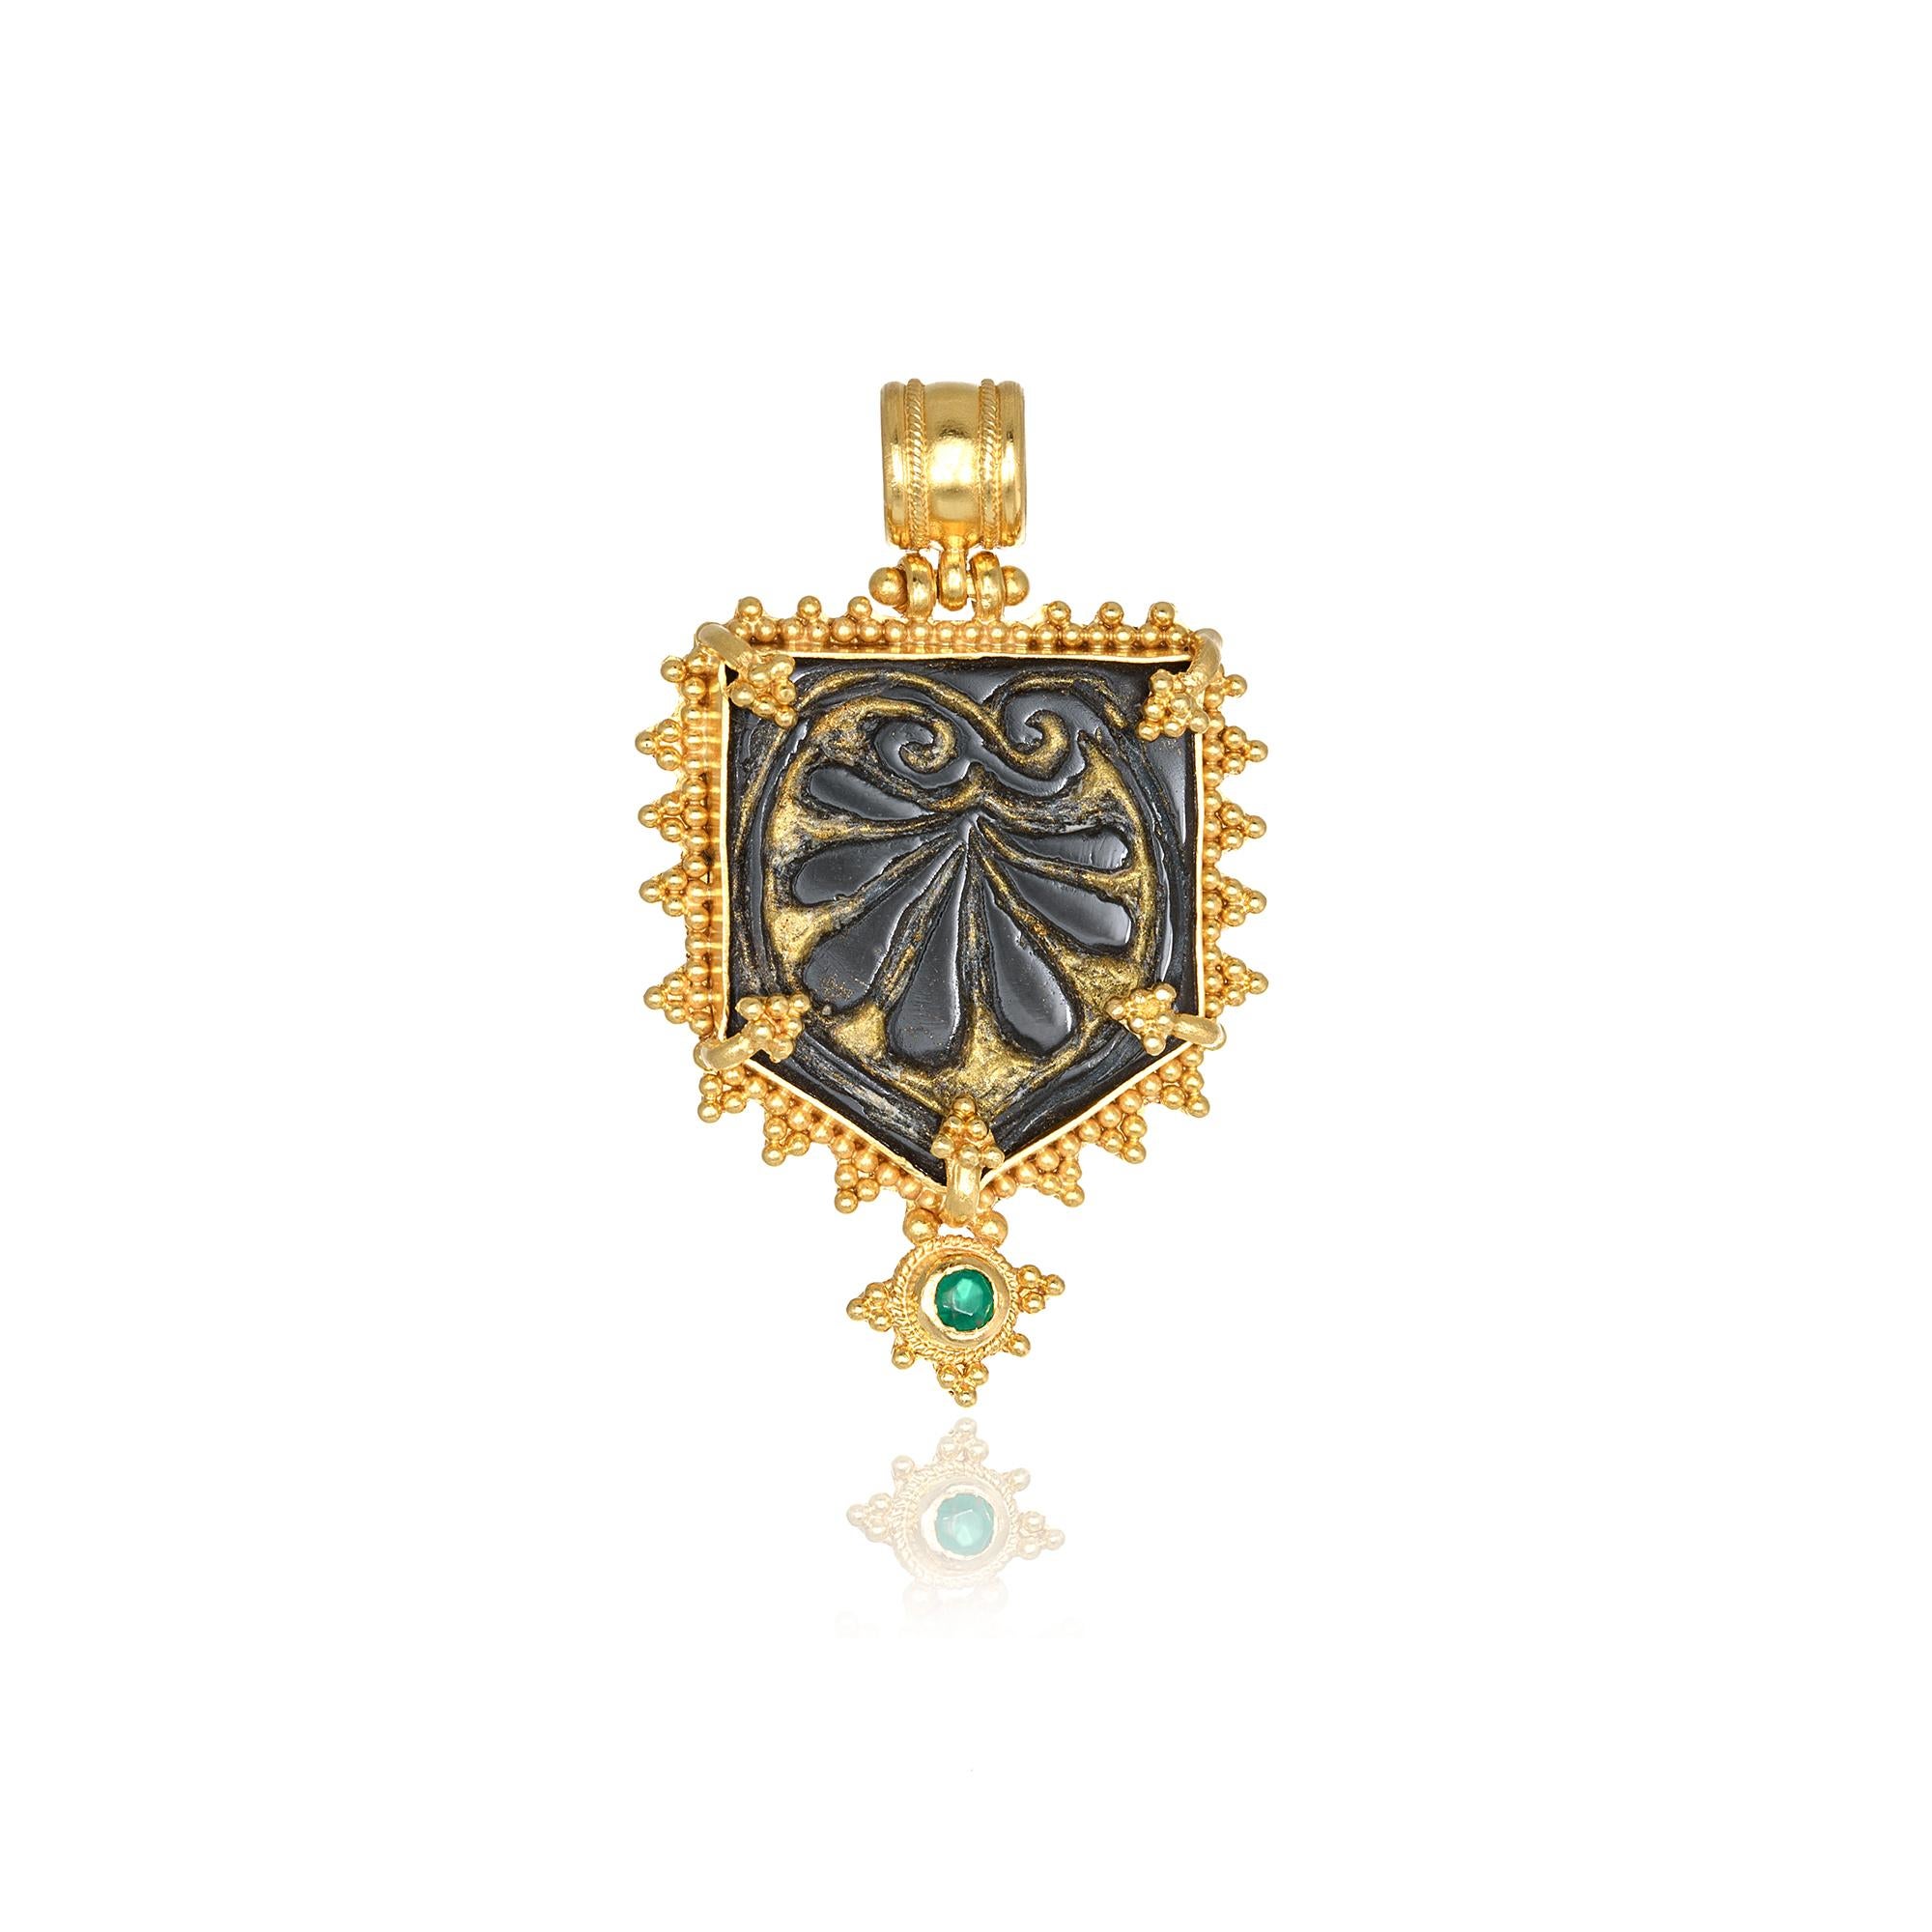 Obsidian hand carved pendant necklace handcrafted in 22Kt yellow gold, featuring a round Emerald. Inspired by the greek nature, Nicofilimon designed this breathtaking jewelry piece highlighting the elegant shilouete of an Acanthus Flower. The minute